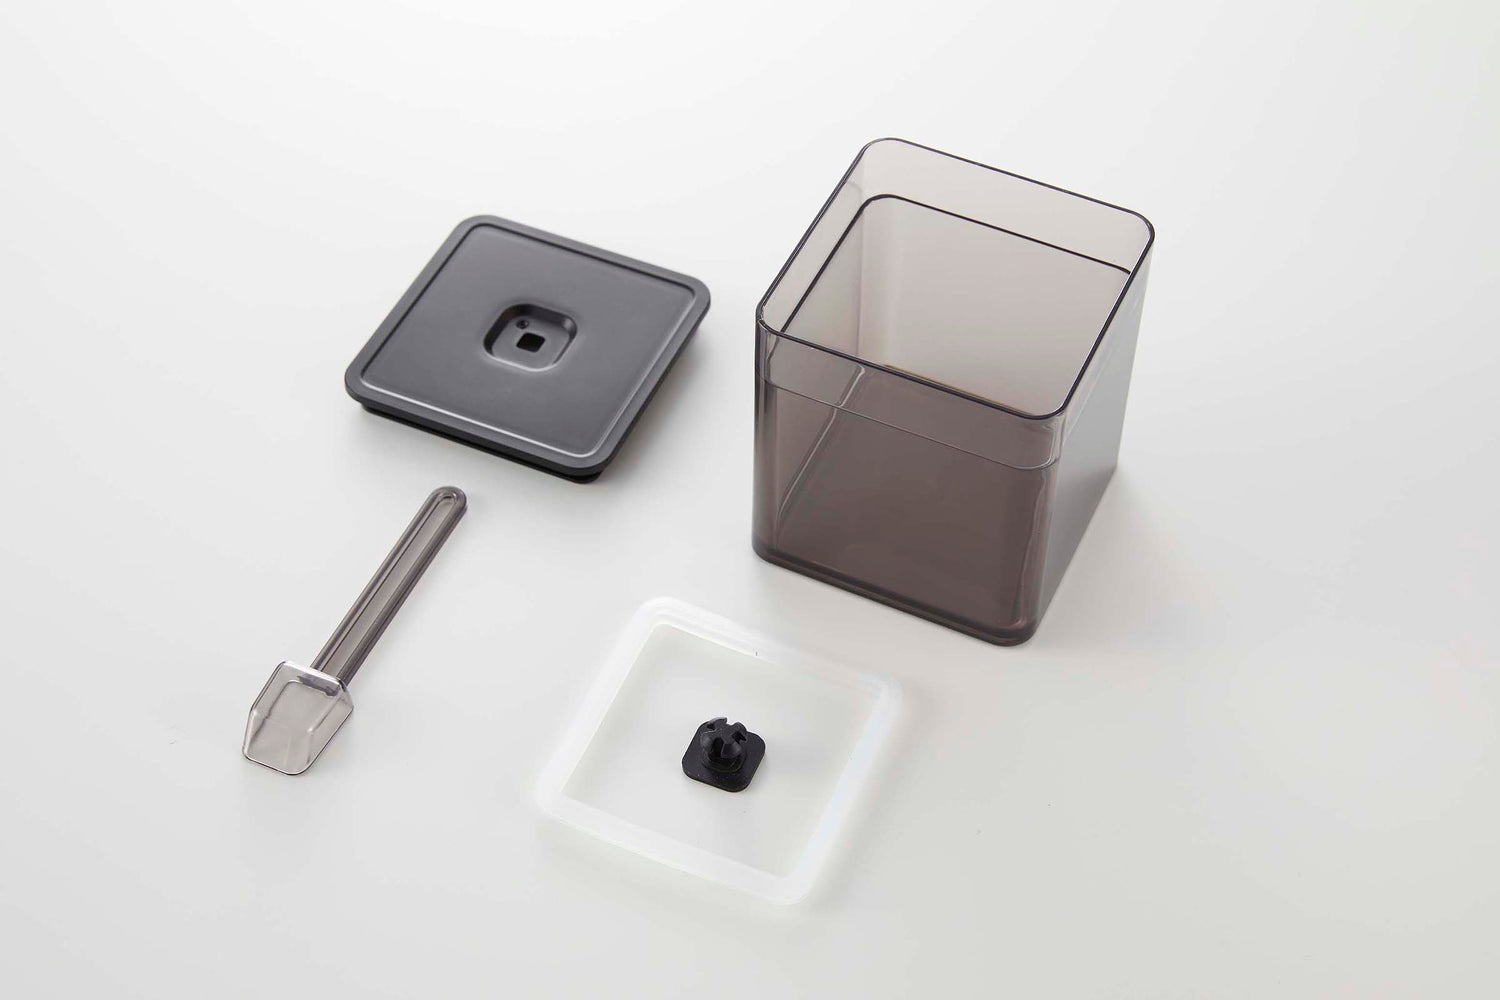 View 13 - Disassembled black Vacuum-Sealing Food Container w. Spoon on white background by Yamazaki Home.